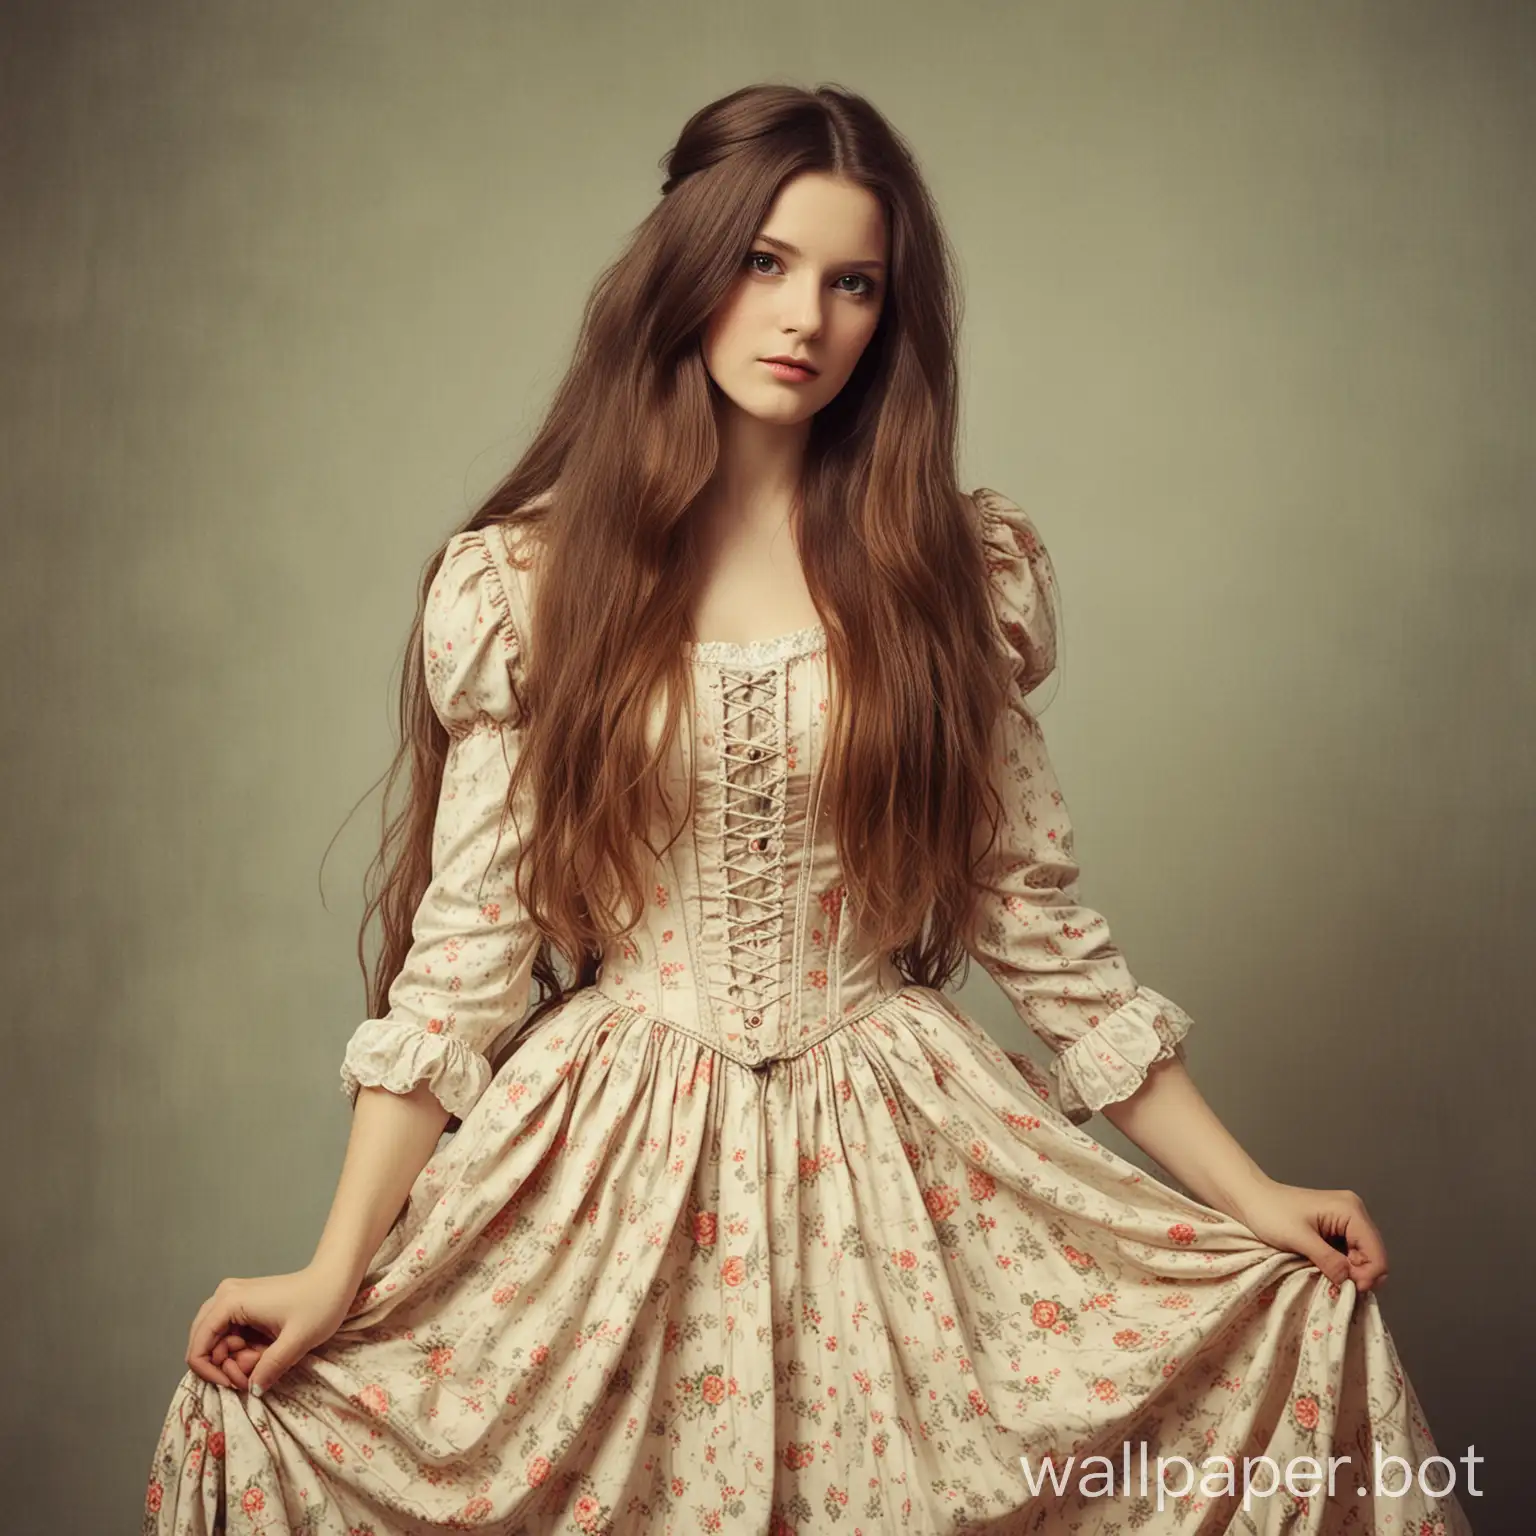 Vintage-Style-Maiden-with-Elaborate-Dress-and-Long-Hair